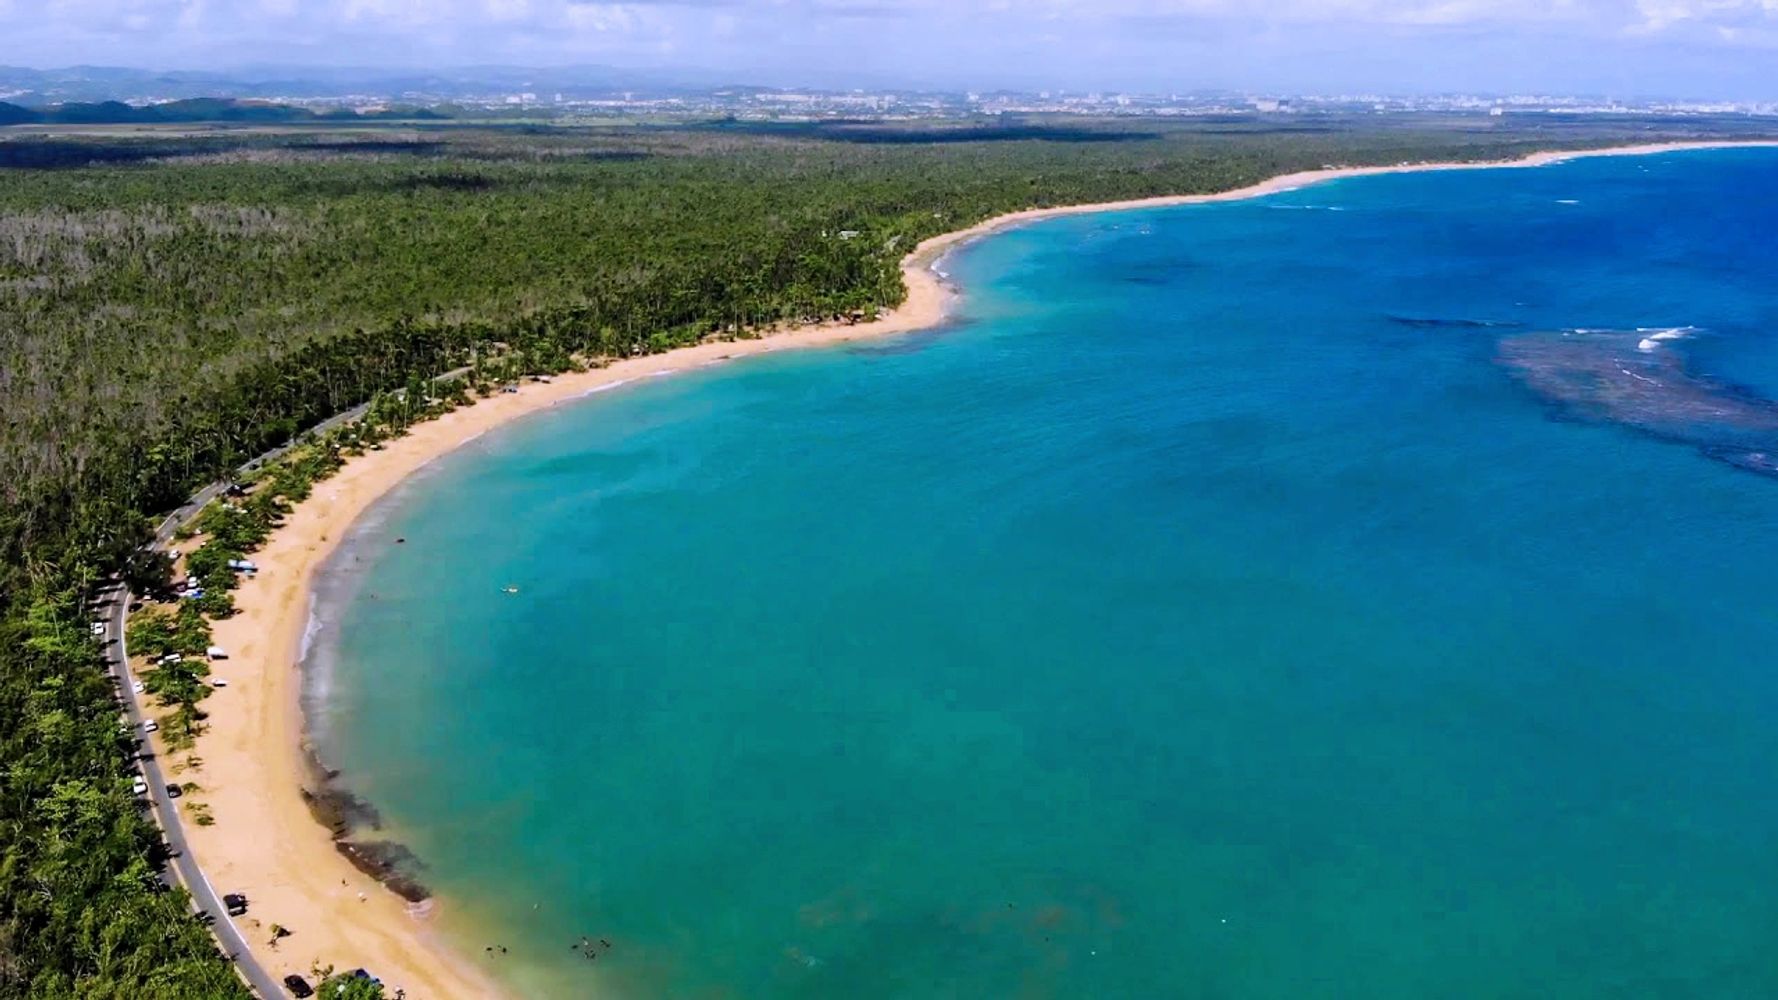 Welcome to one of the best beaches in the world, Puerto Rico in the Caribbean, with the best Investm